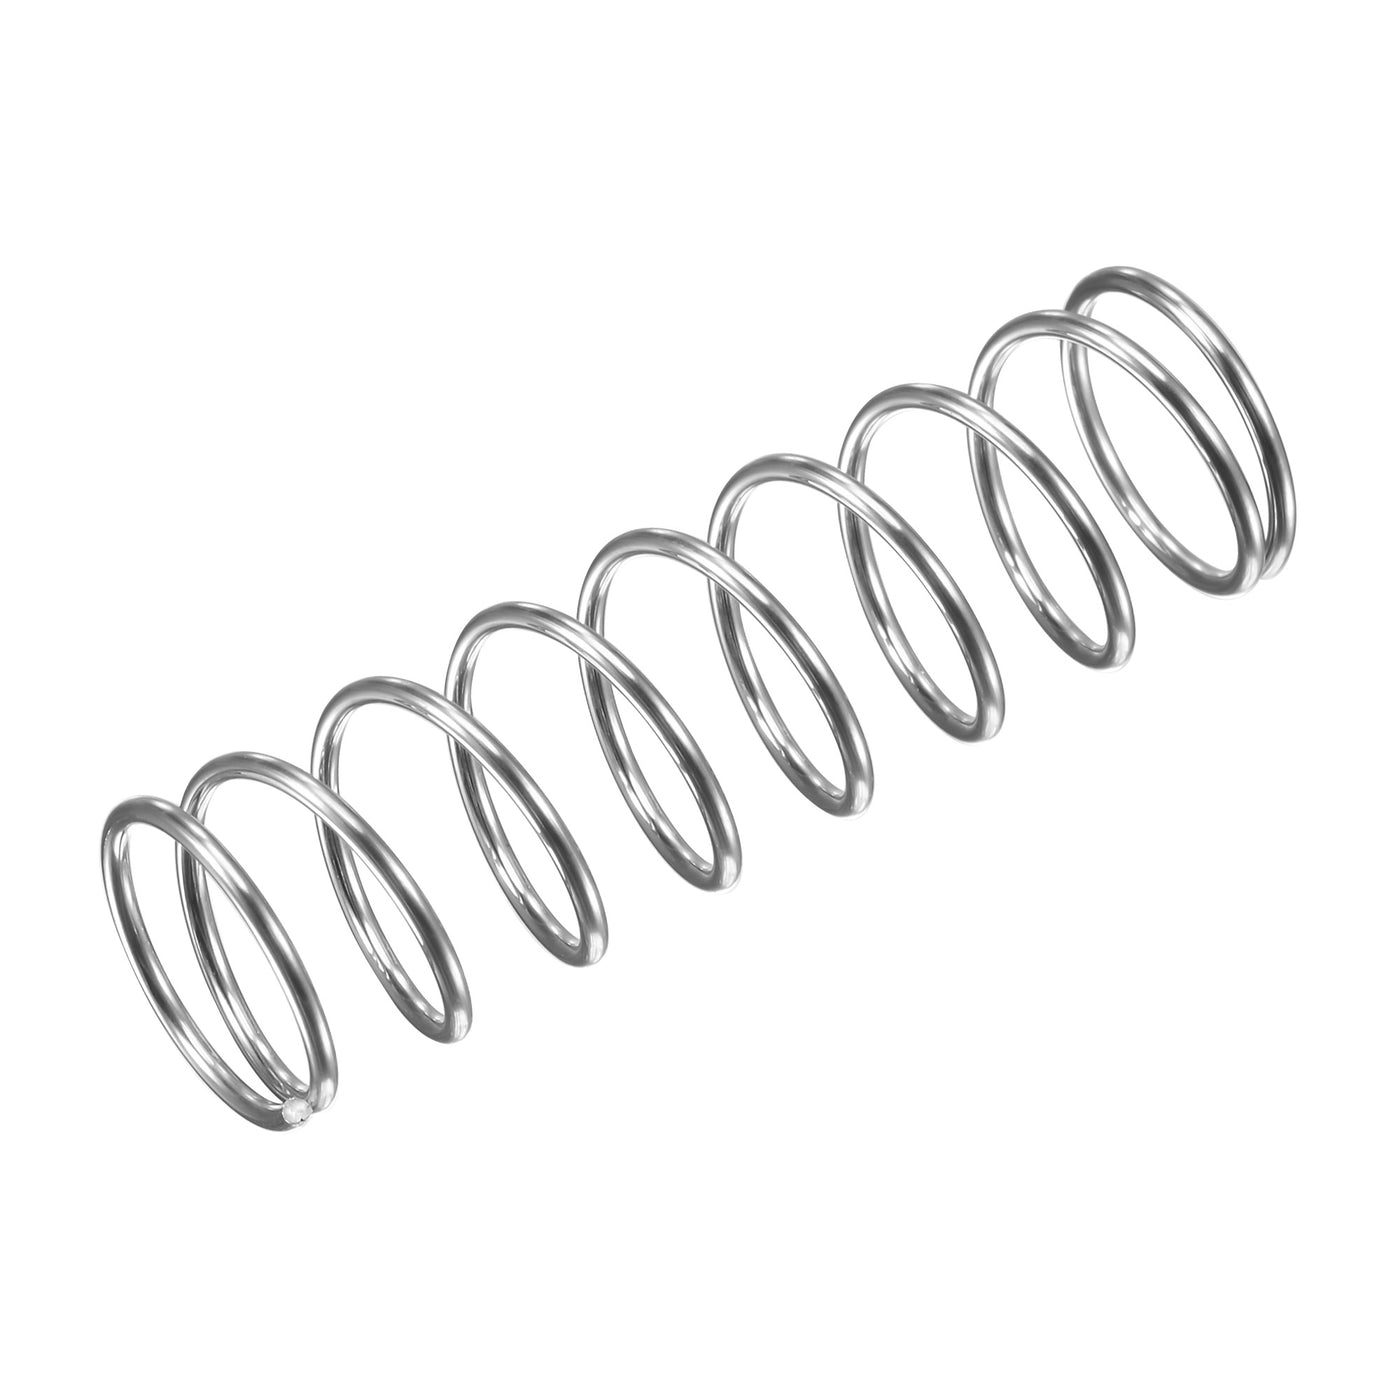 uxcell Uxcell 15mmx1.2mmx50mm 304 Stainless Steel Compression Spring 15.7N Load Capacity 5pcs